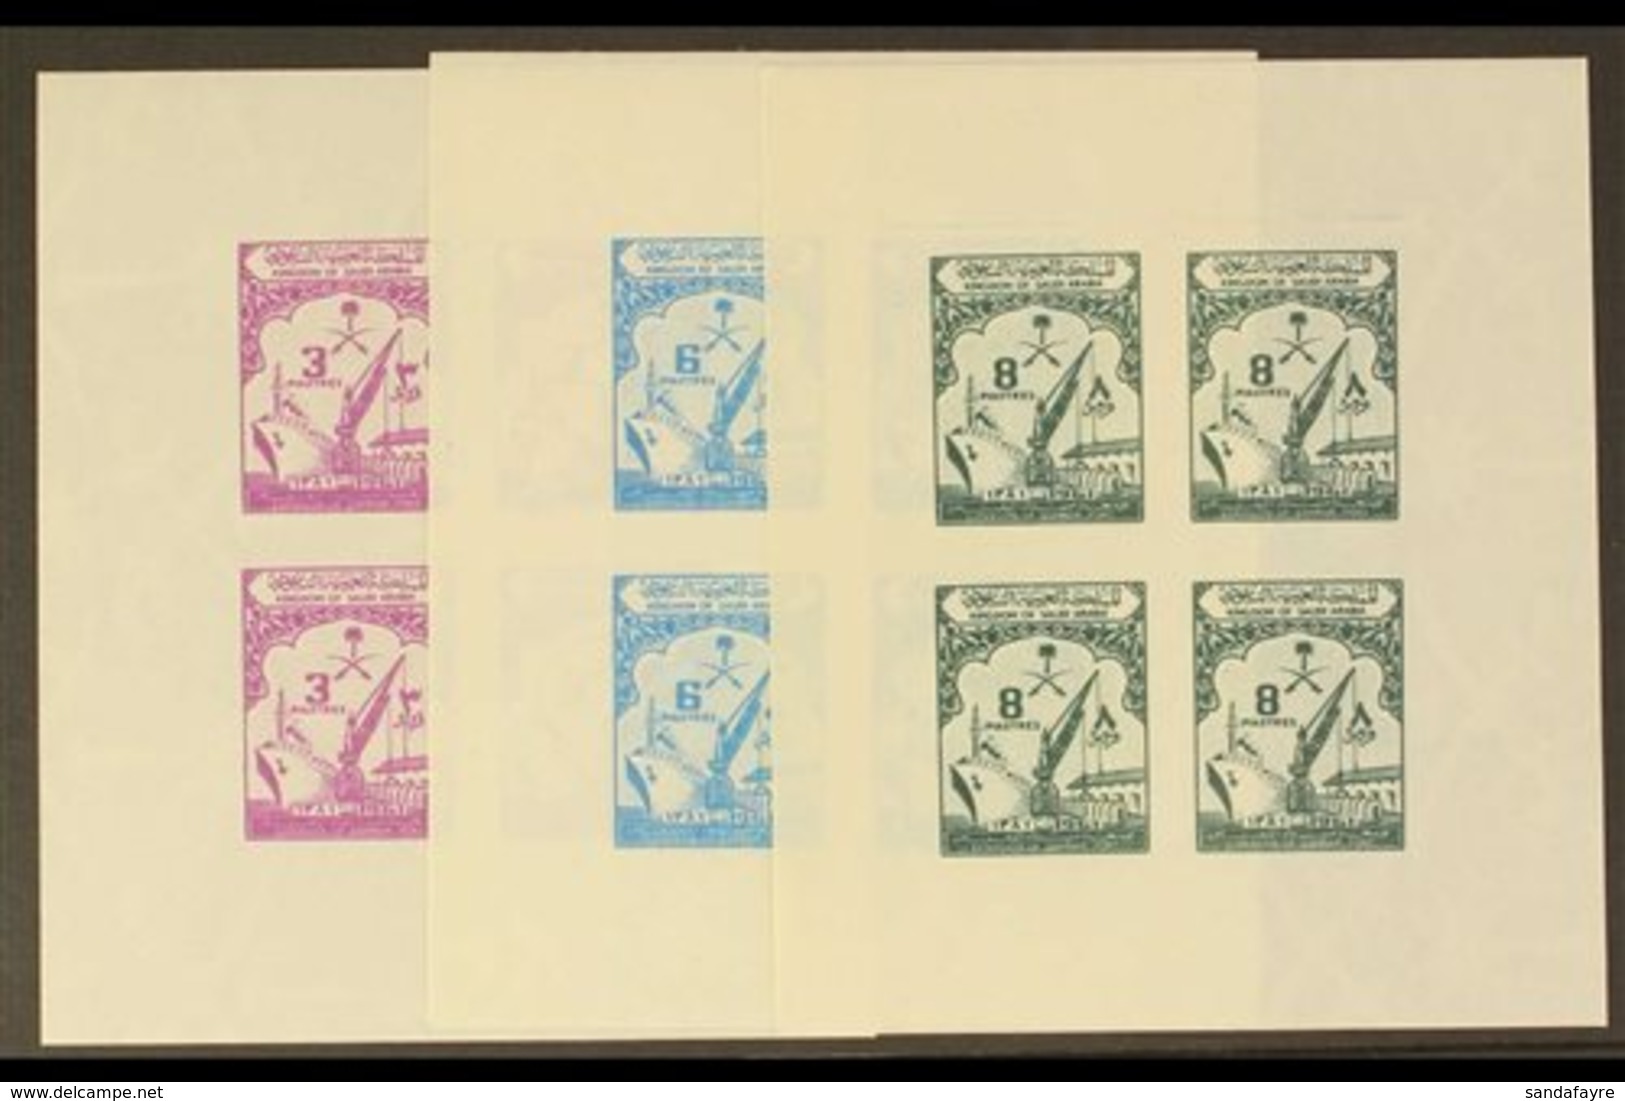 1961 1961 Opening Of Dammam Port Extension Set Of Three As IMPERFORATE MINIATURE SHEETS With Watermark Sideways And Each - Arabie Saoudite